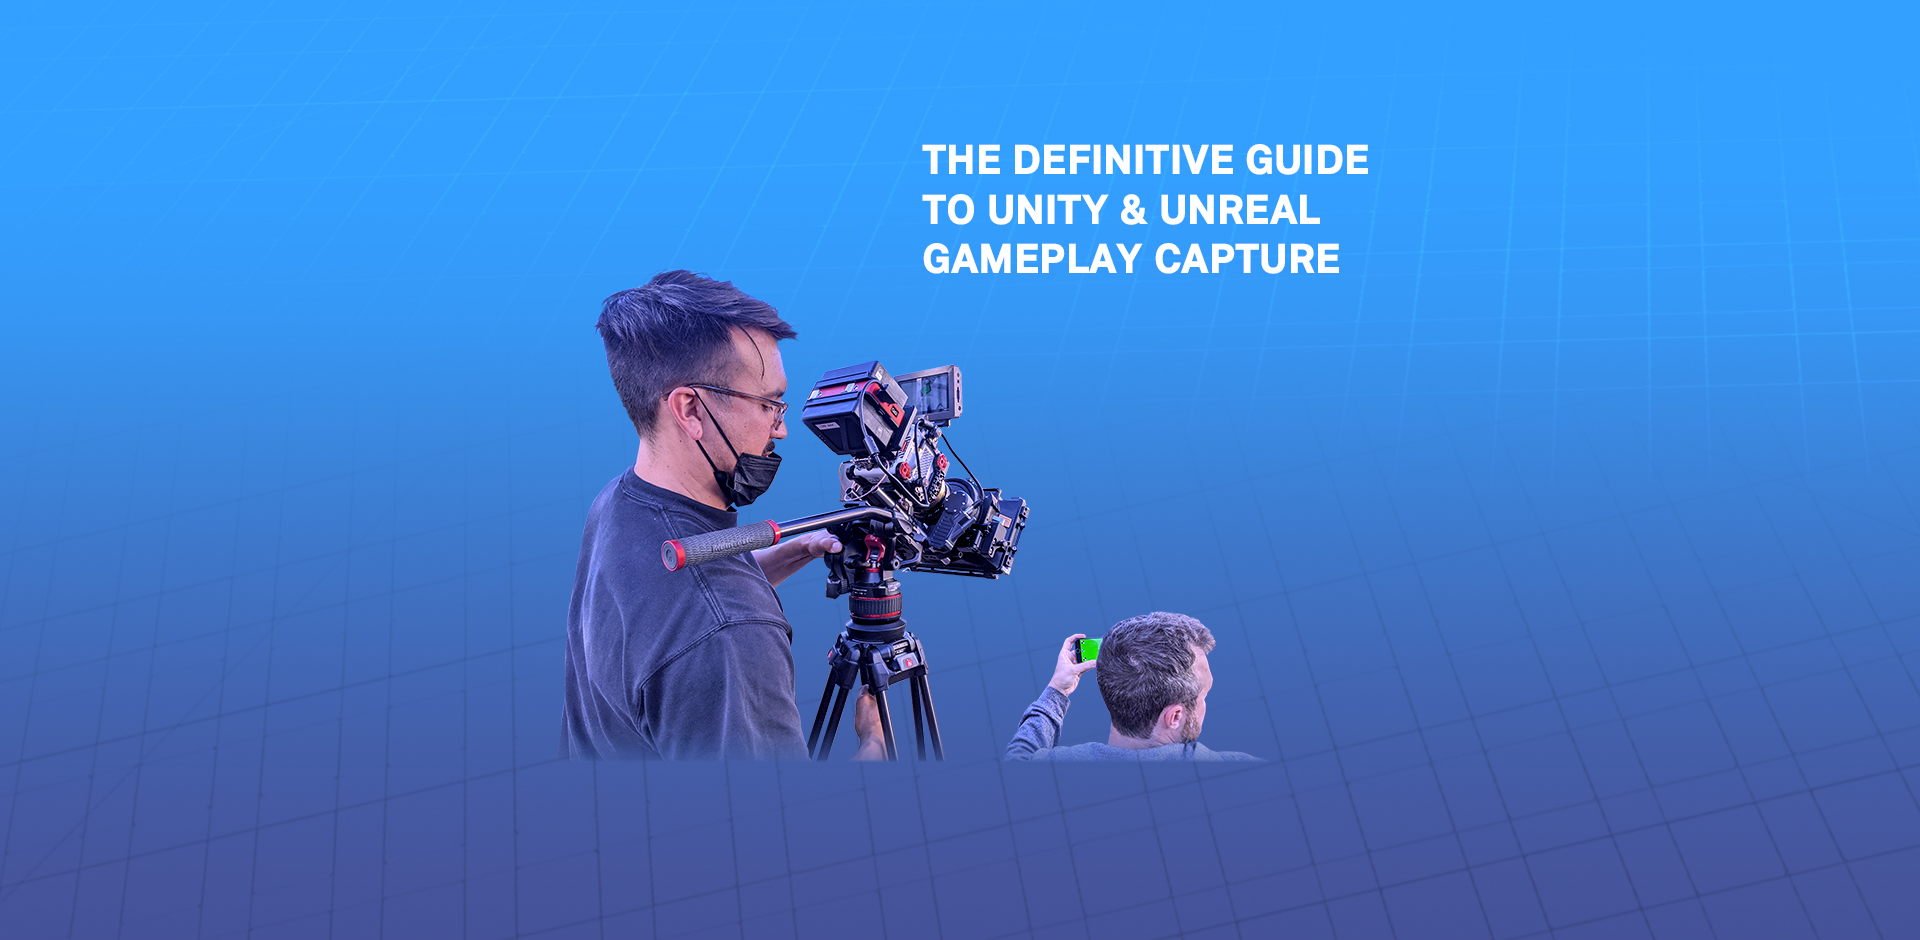 The Definitive Guide to Unity & Unreal Gameplay Capture